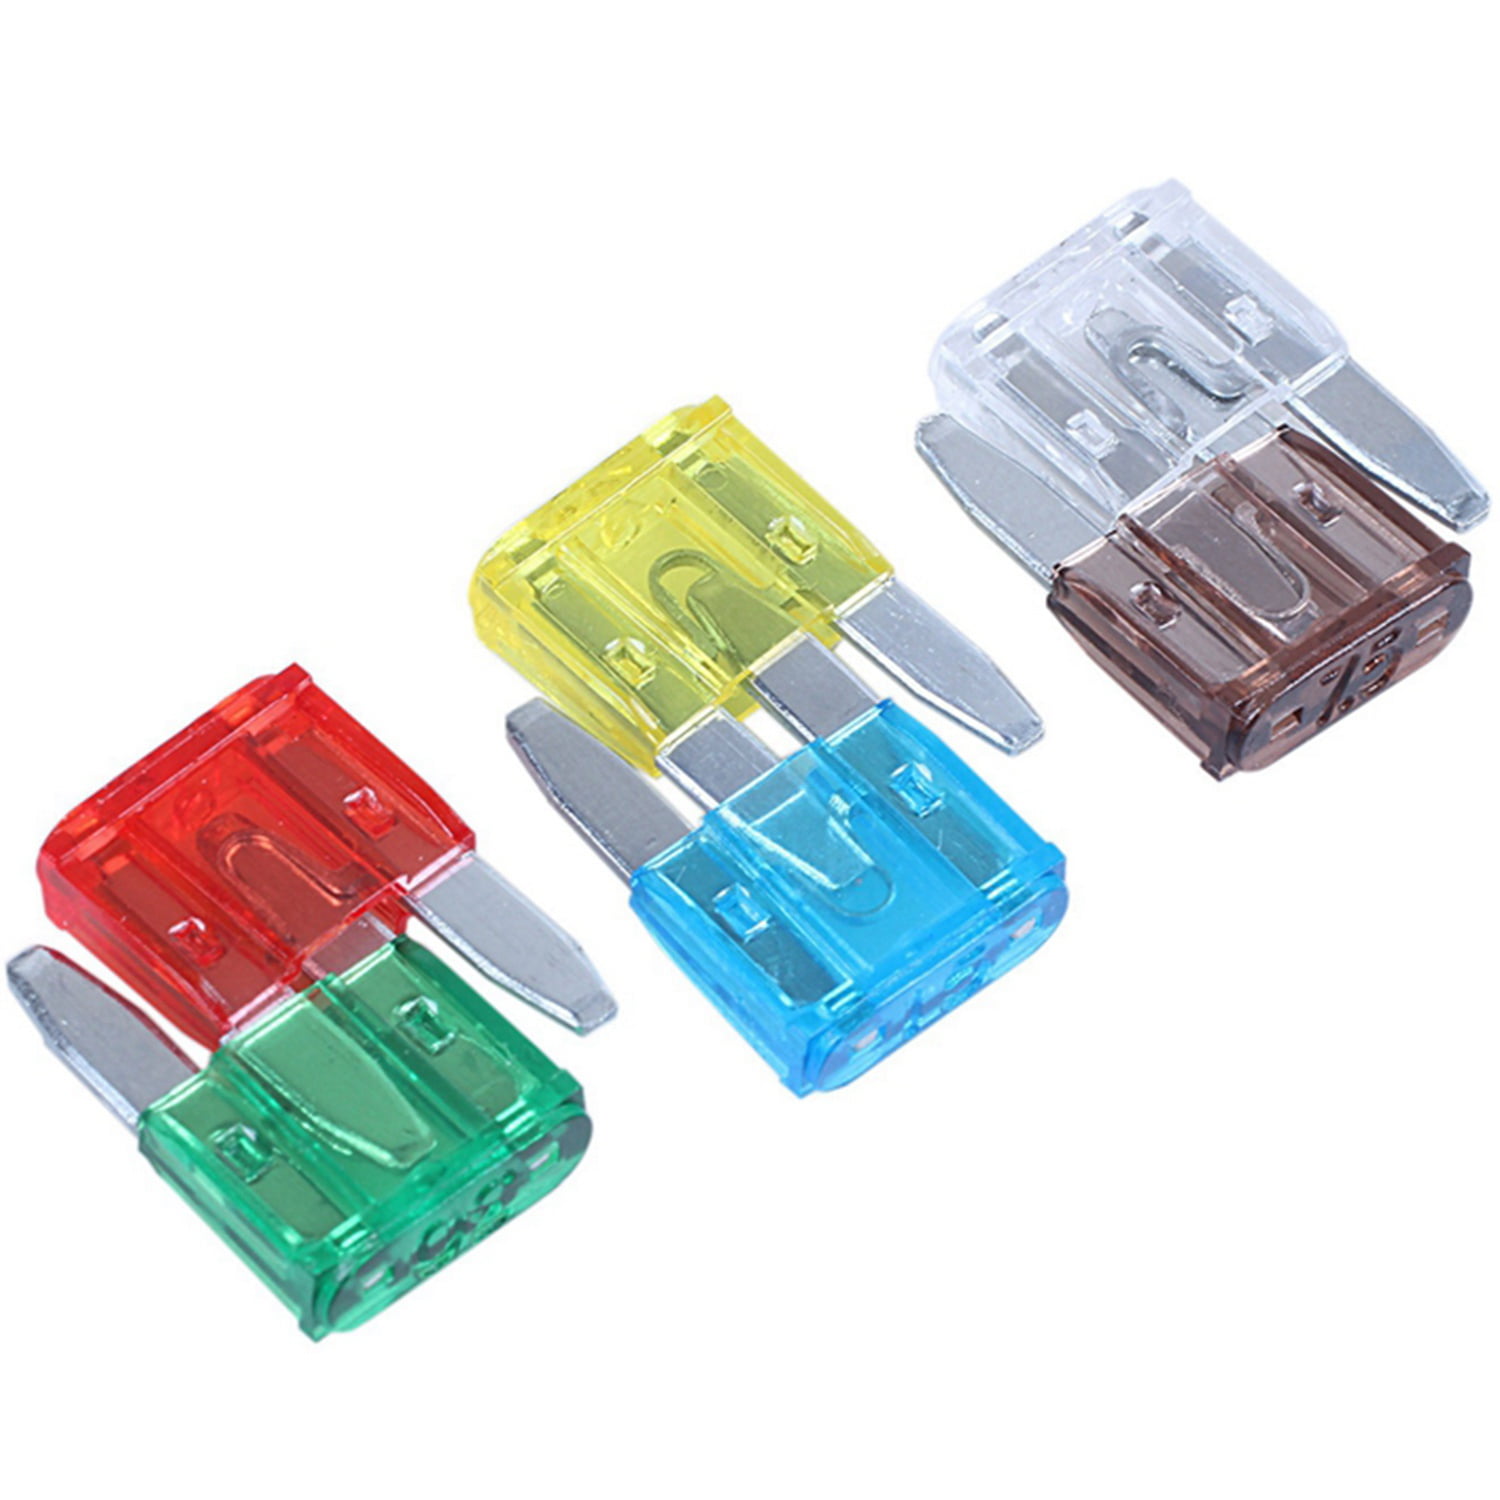 Car Electrical Spare 10x Blade Fuses 10 Amp For Electrical Components 